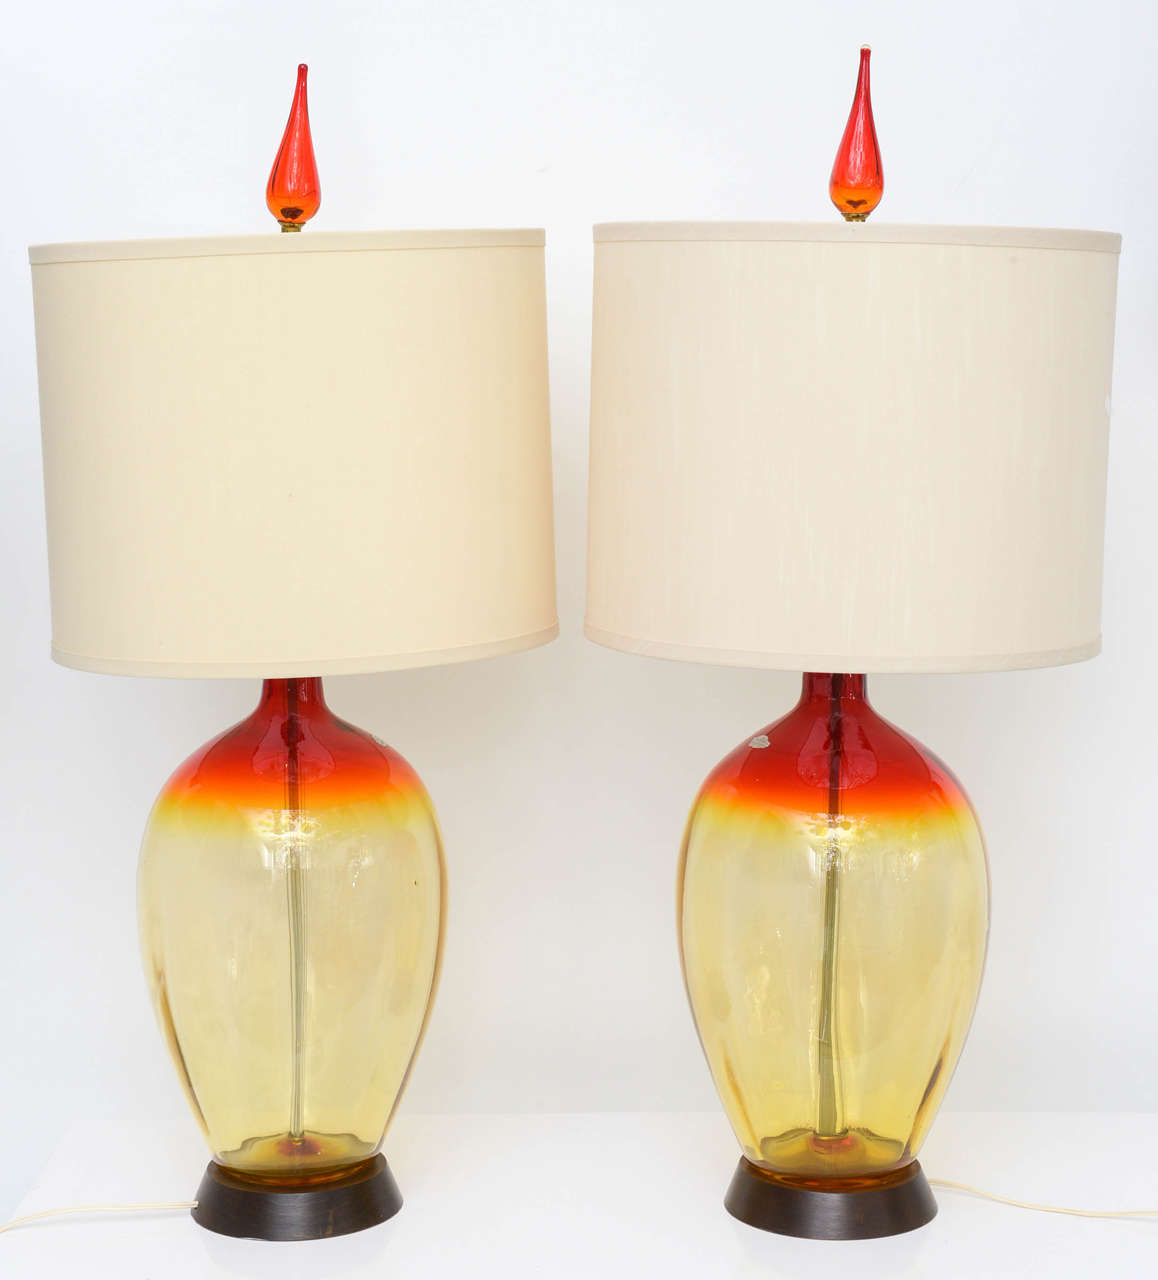 Pair of vintage blenko glass lamps with yellow to orange ombre. The lamps have three-way switches, original wiring, adjustable harps, shades and original teardrop glass finials.